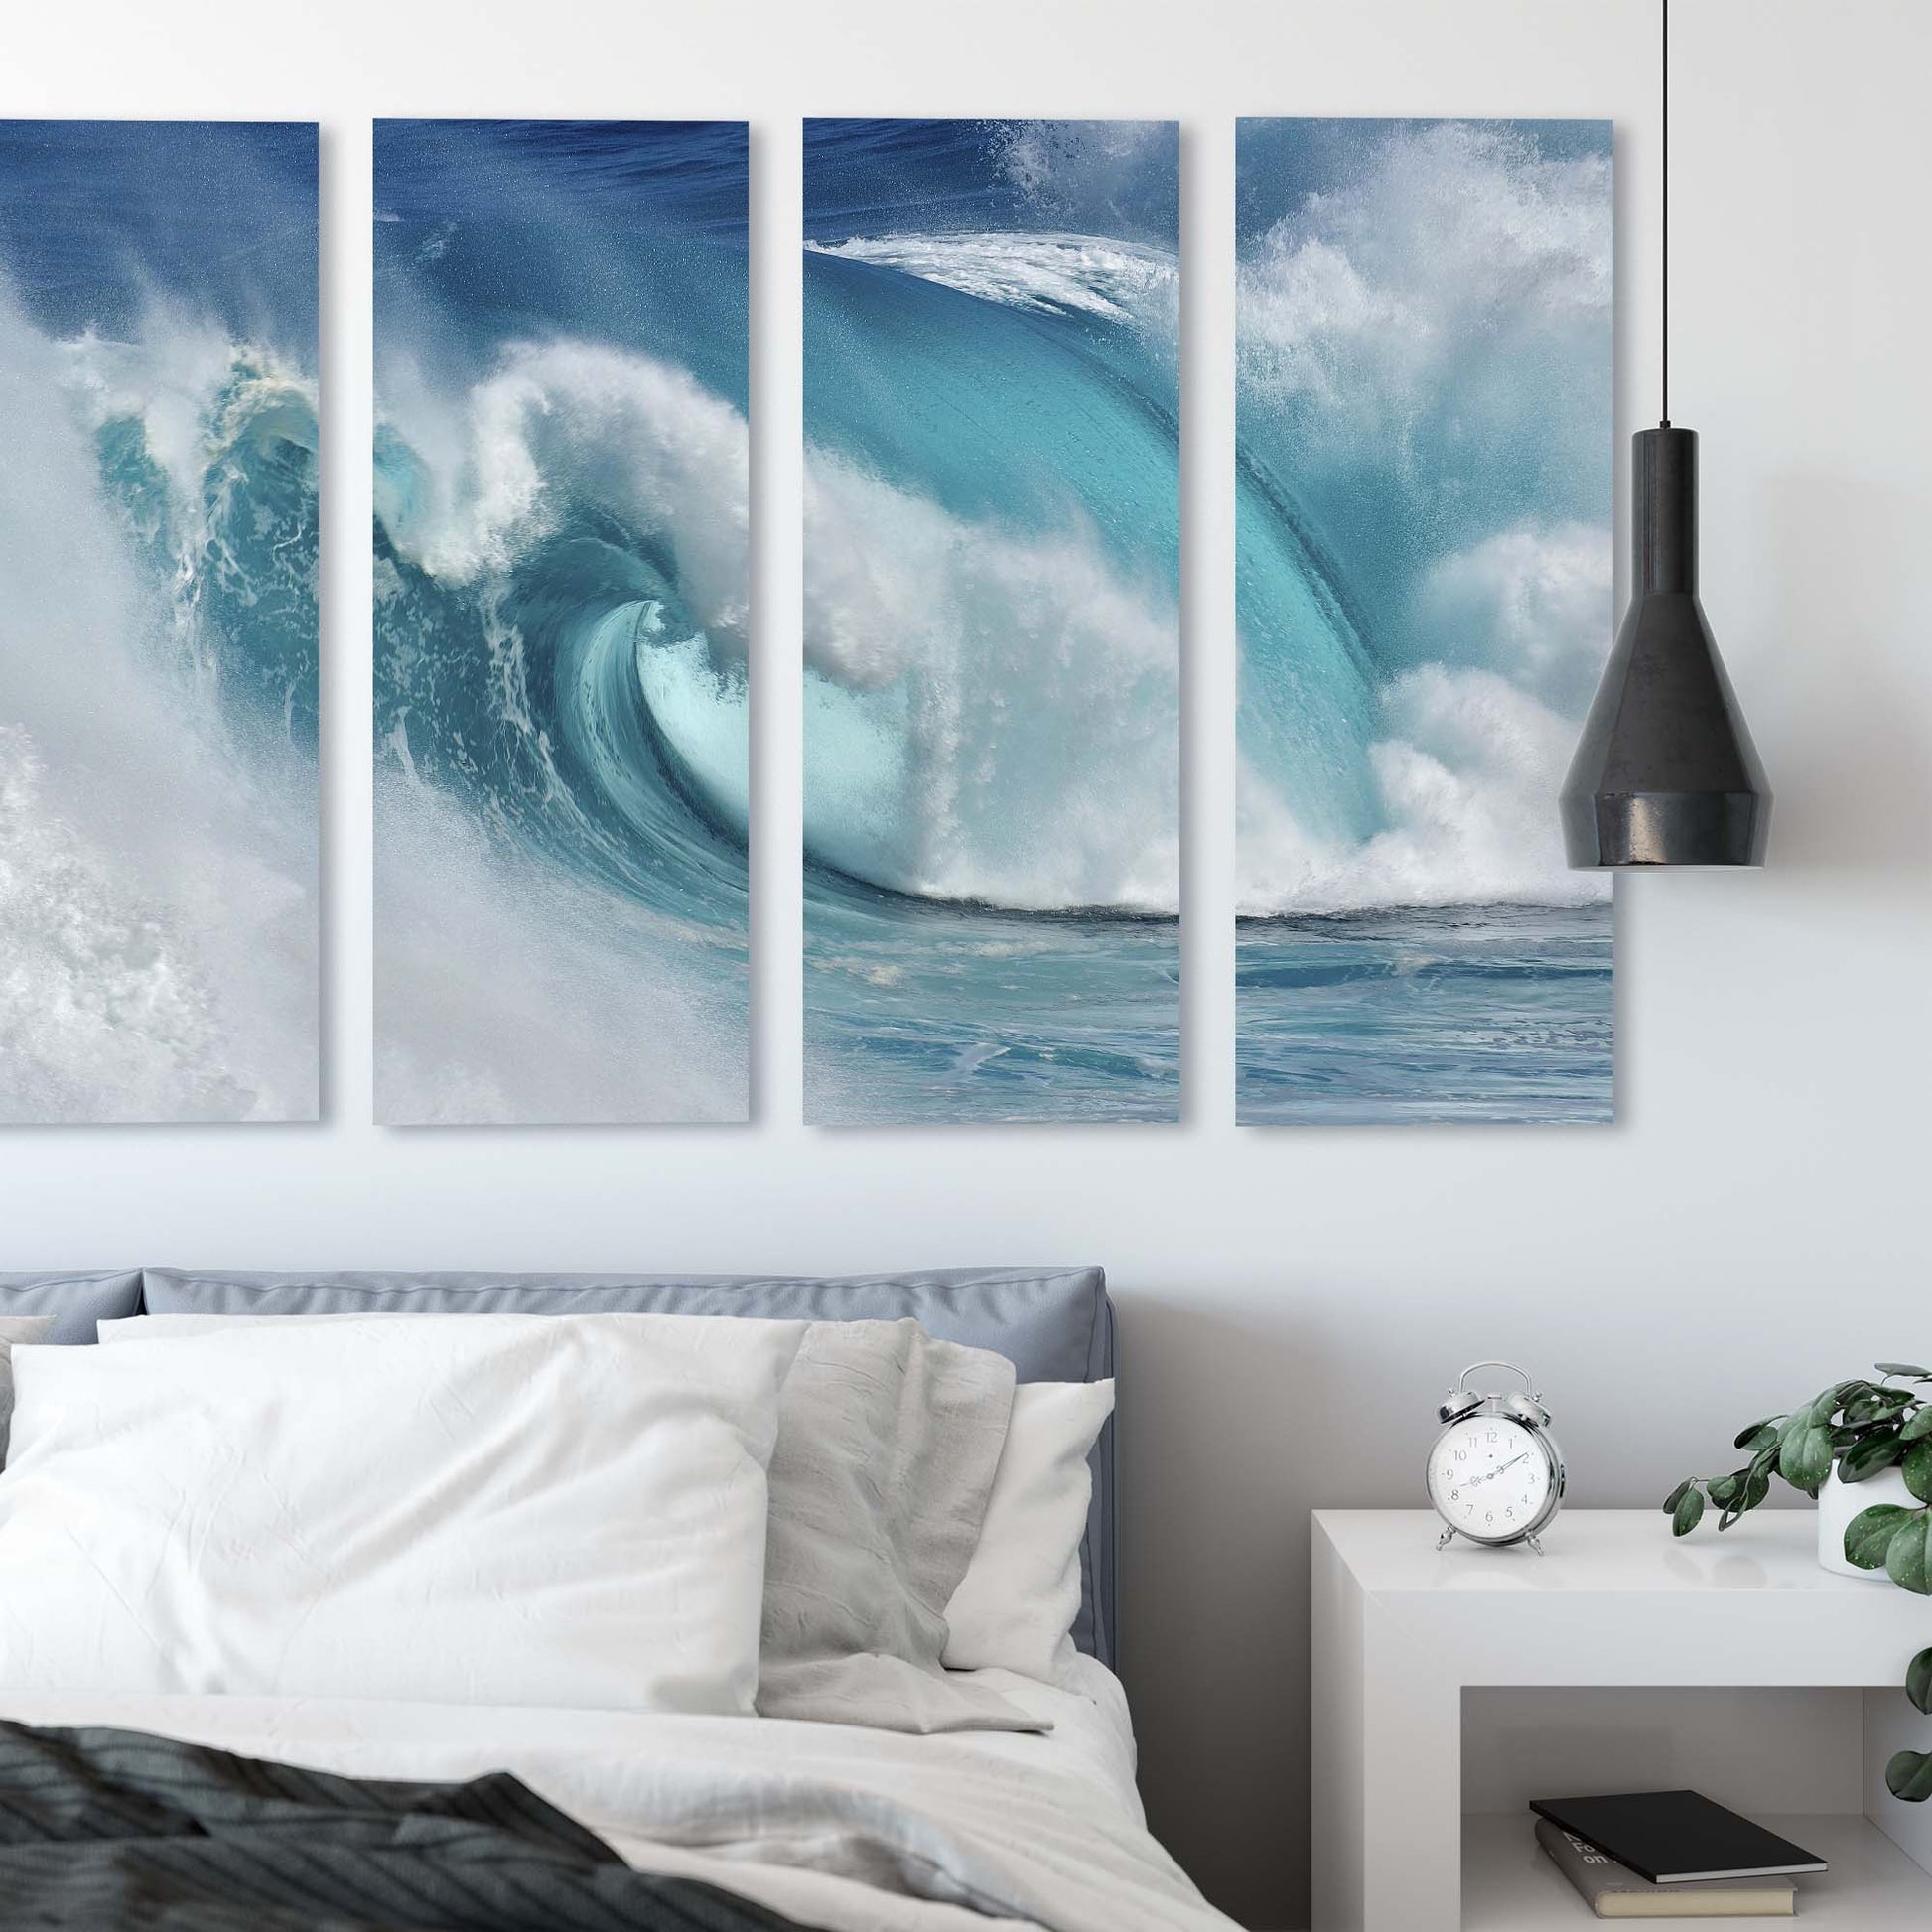 When the ocean turns into blue fire by Daniel Montero Canvas Print - USTAD HOME